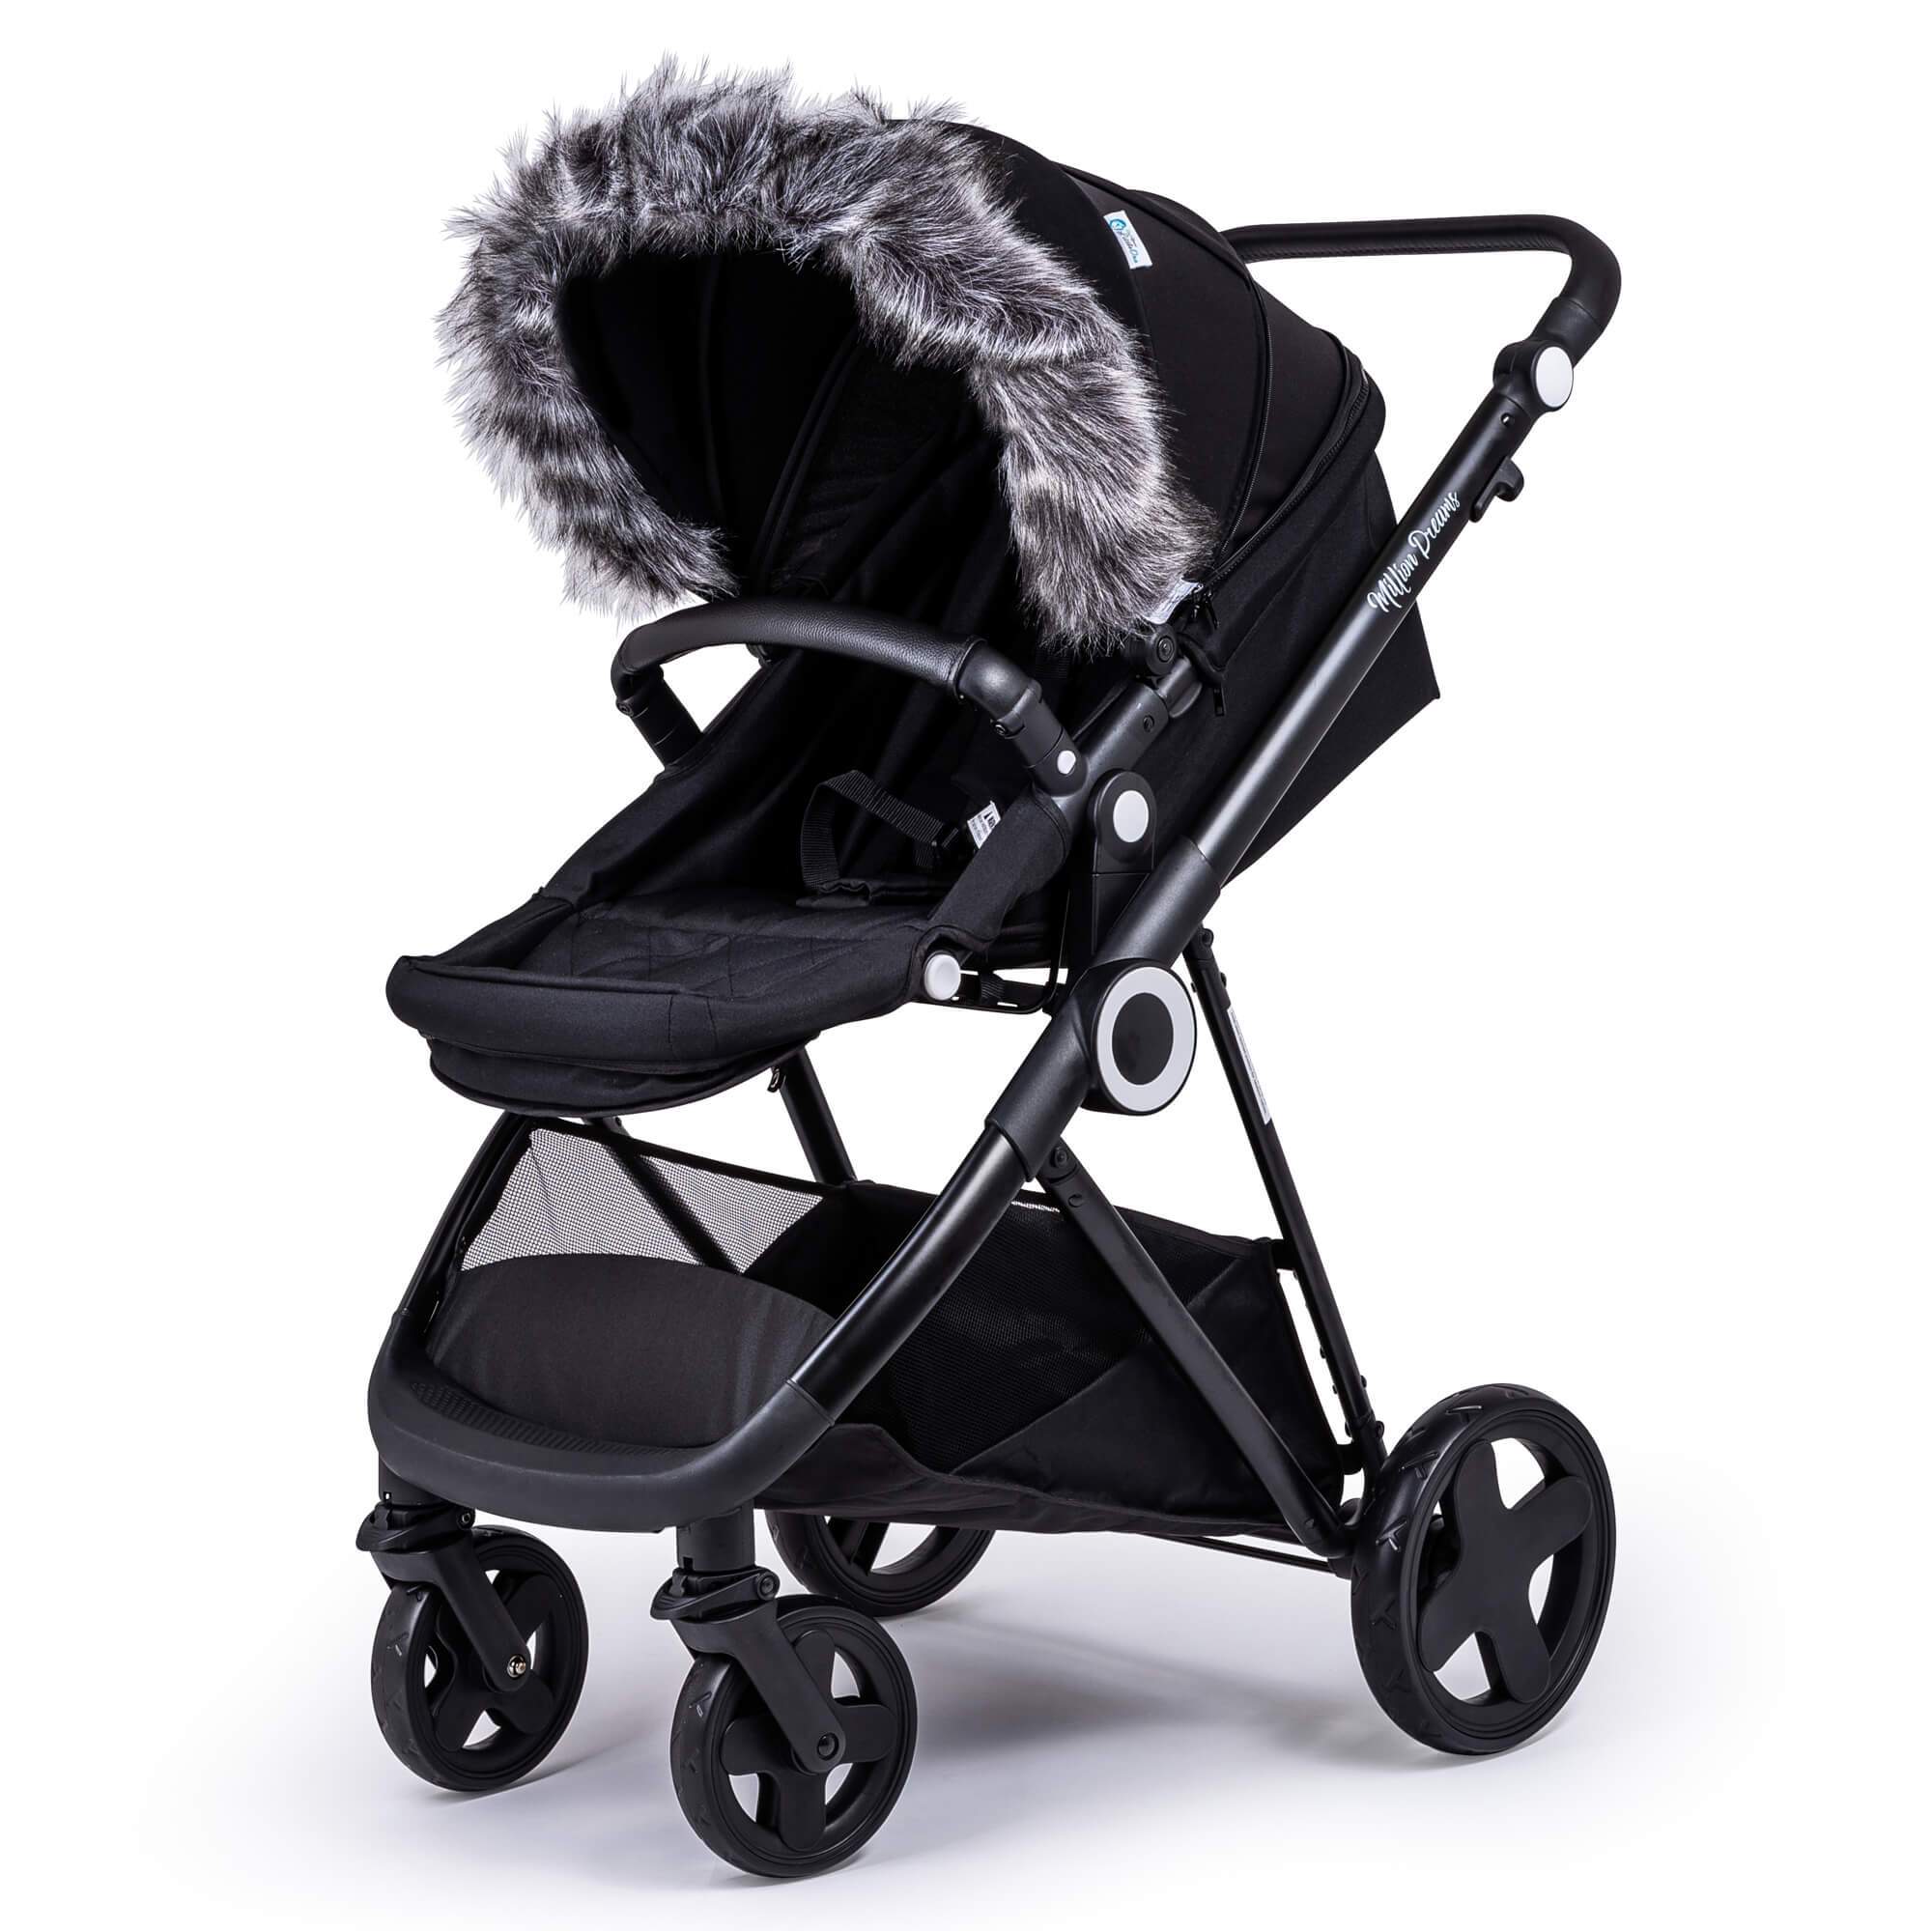 Pram Fur Hood Trim Attachment for Pushchair Compatible with Little Shield - Dark Grey / Fits All Models | For Your Little One